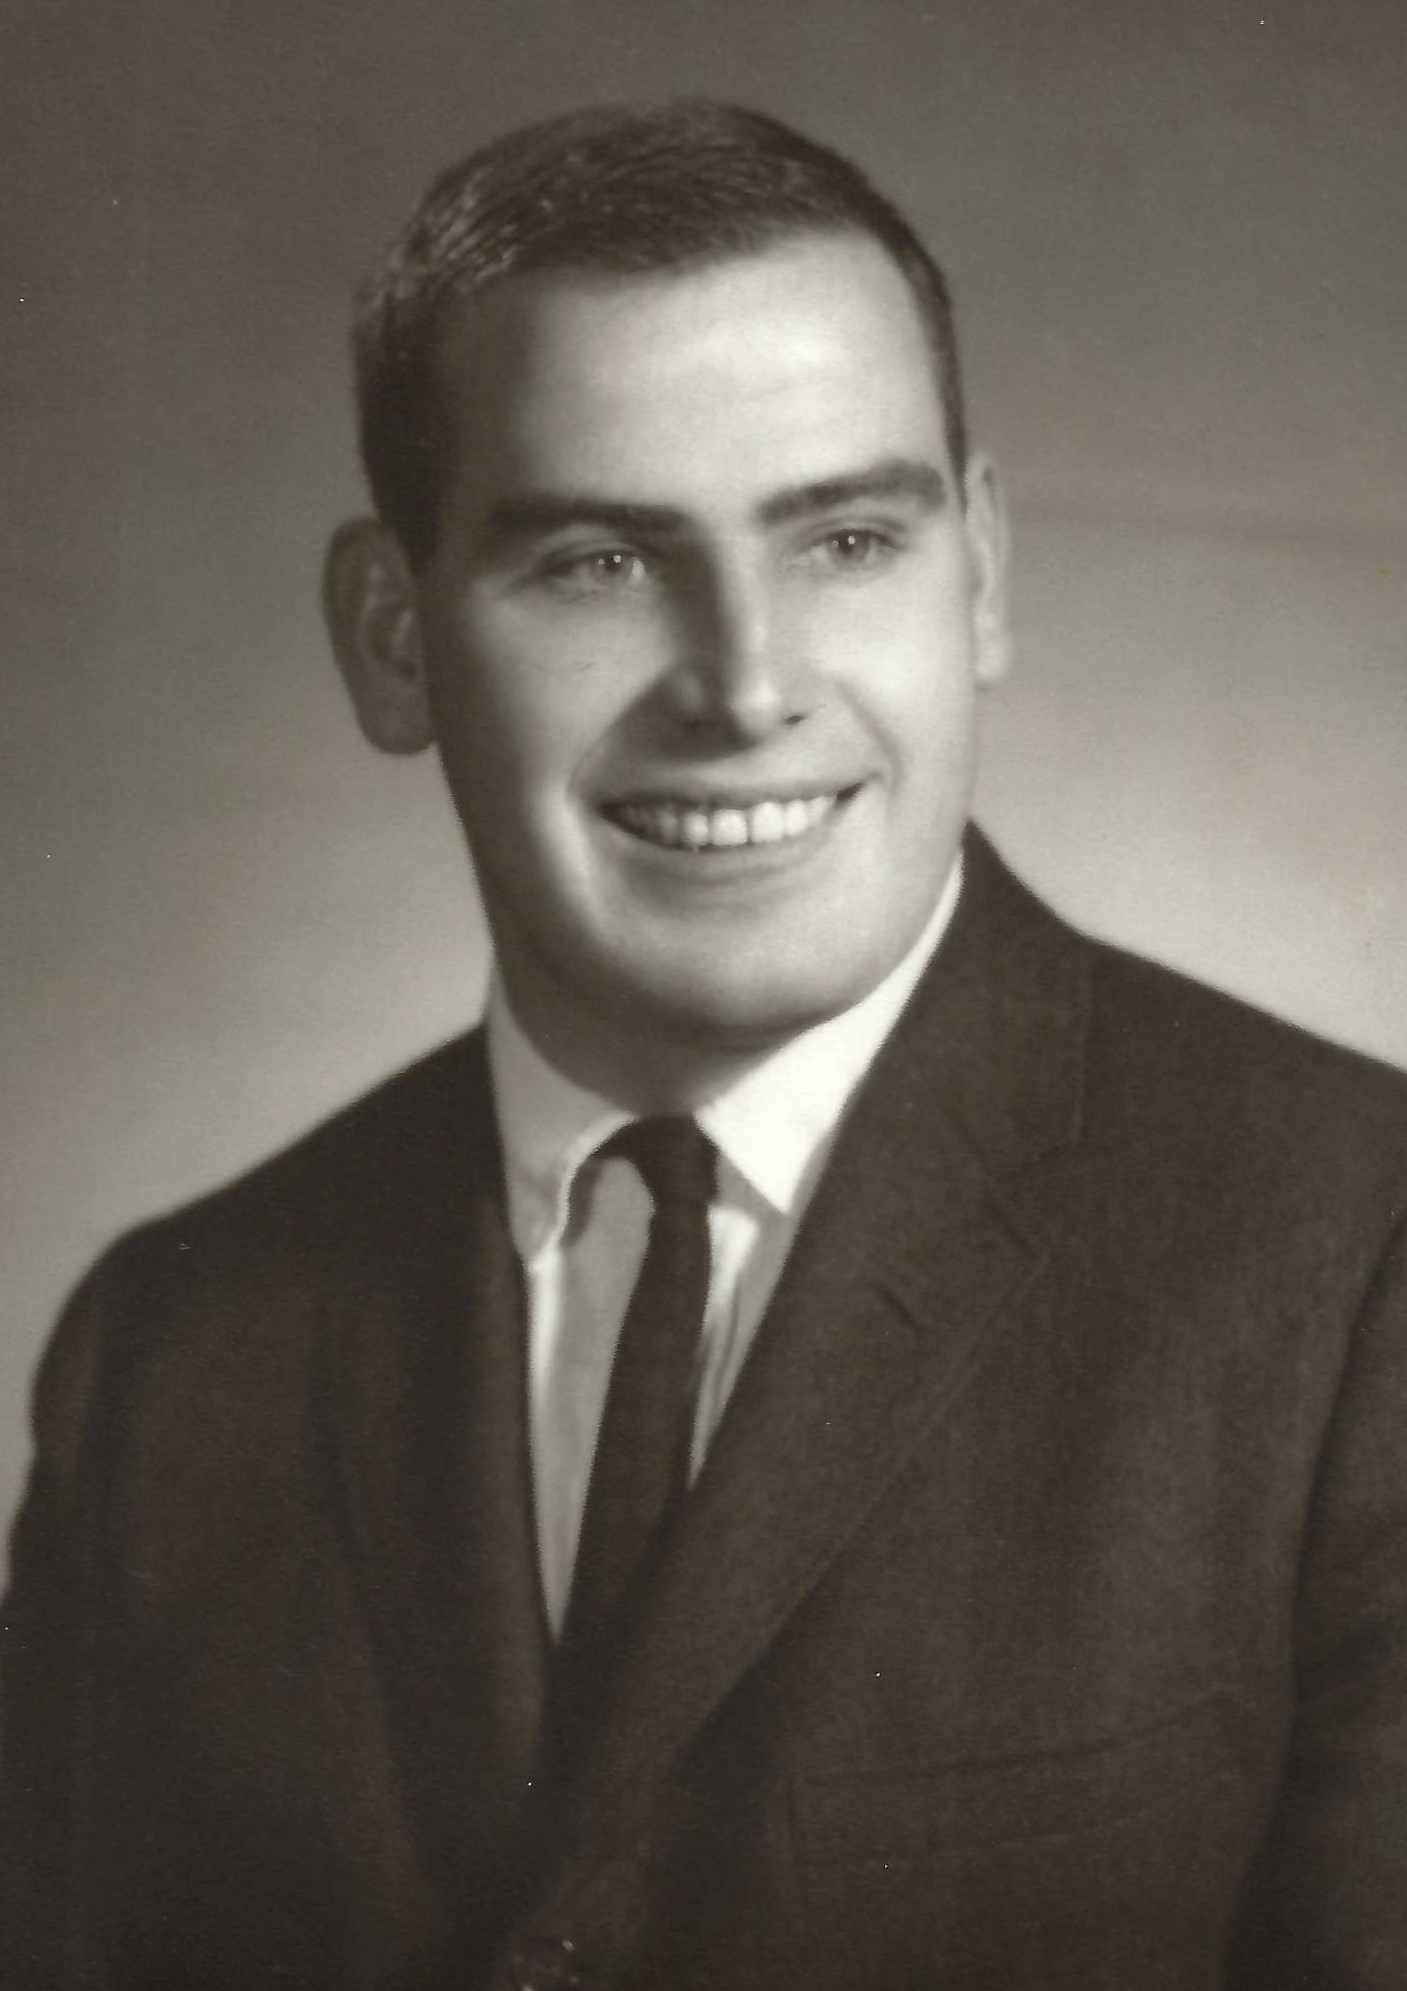 Robert R. Brown, “Bobby”, 88 – Comeau Funeral Home